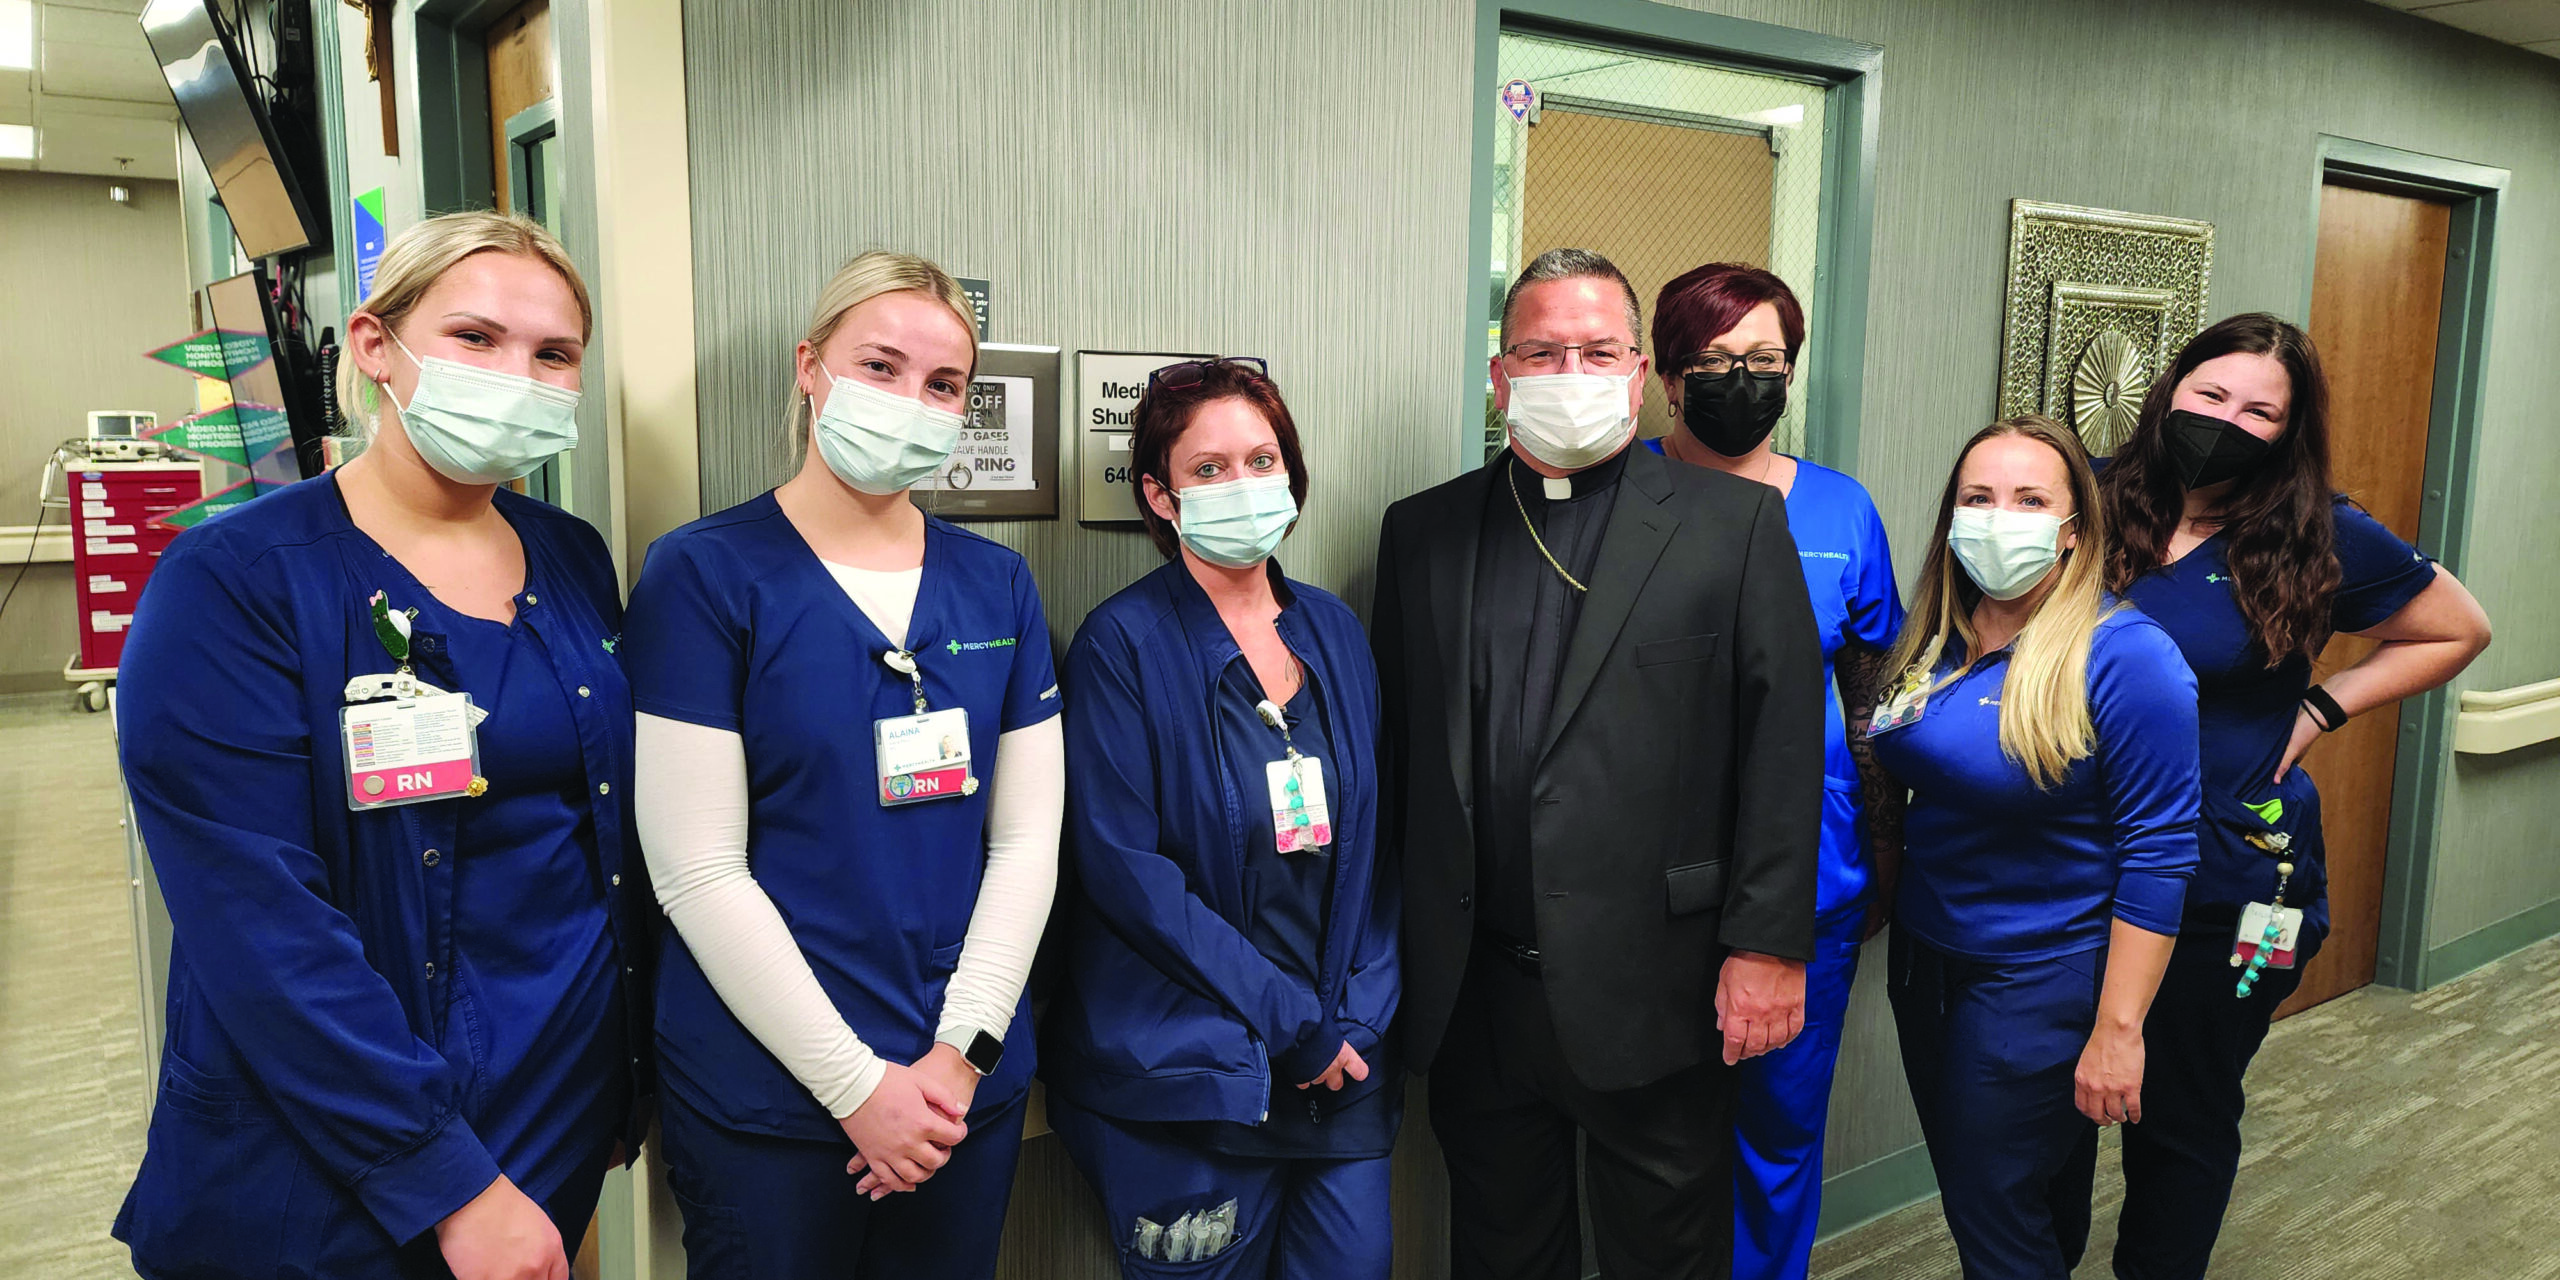 Bishop Bonnar with healthcare professionals at St. Elizabeth Hospital, Youngstown. Photo by Justin Huyck.